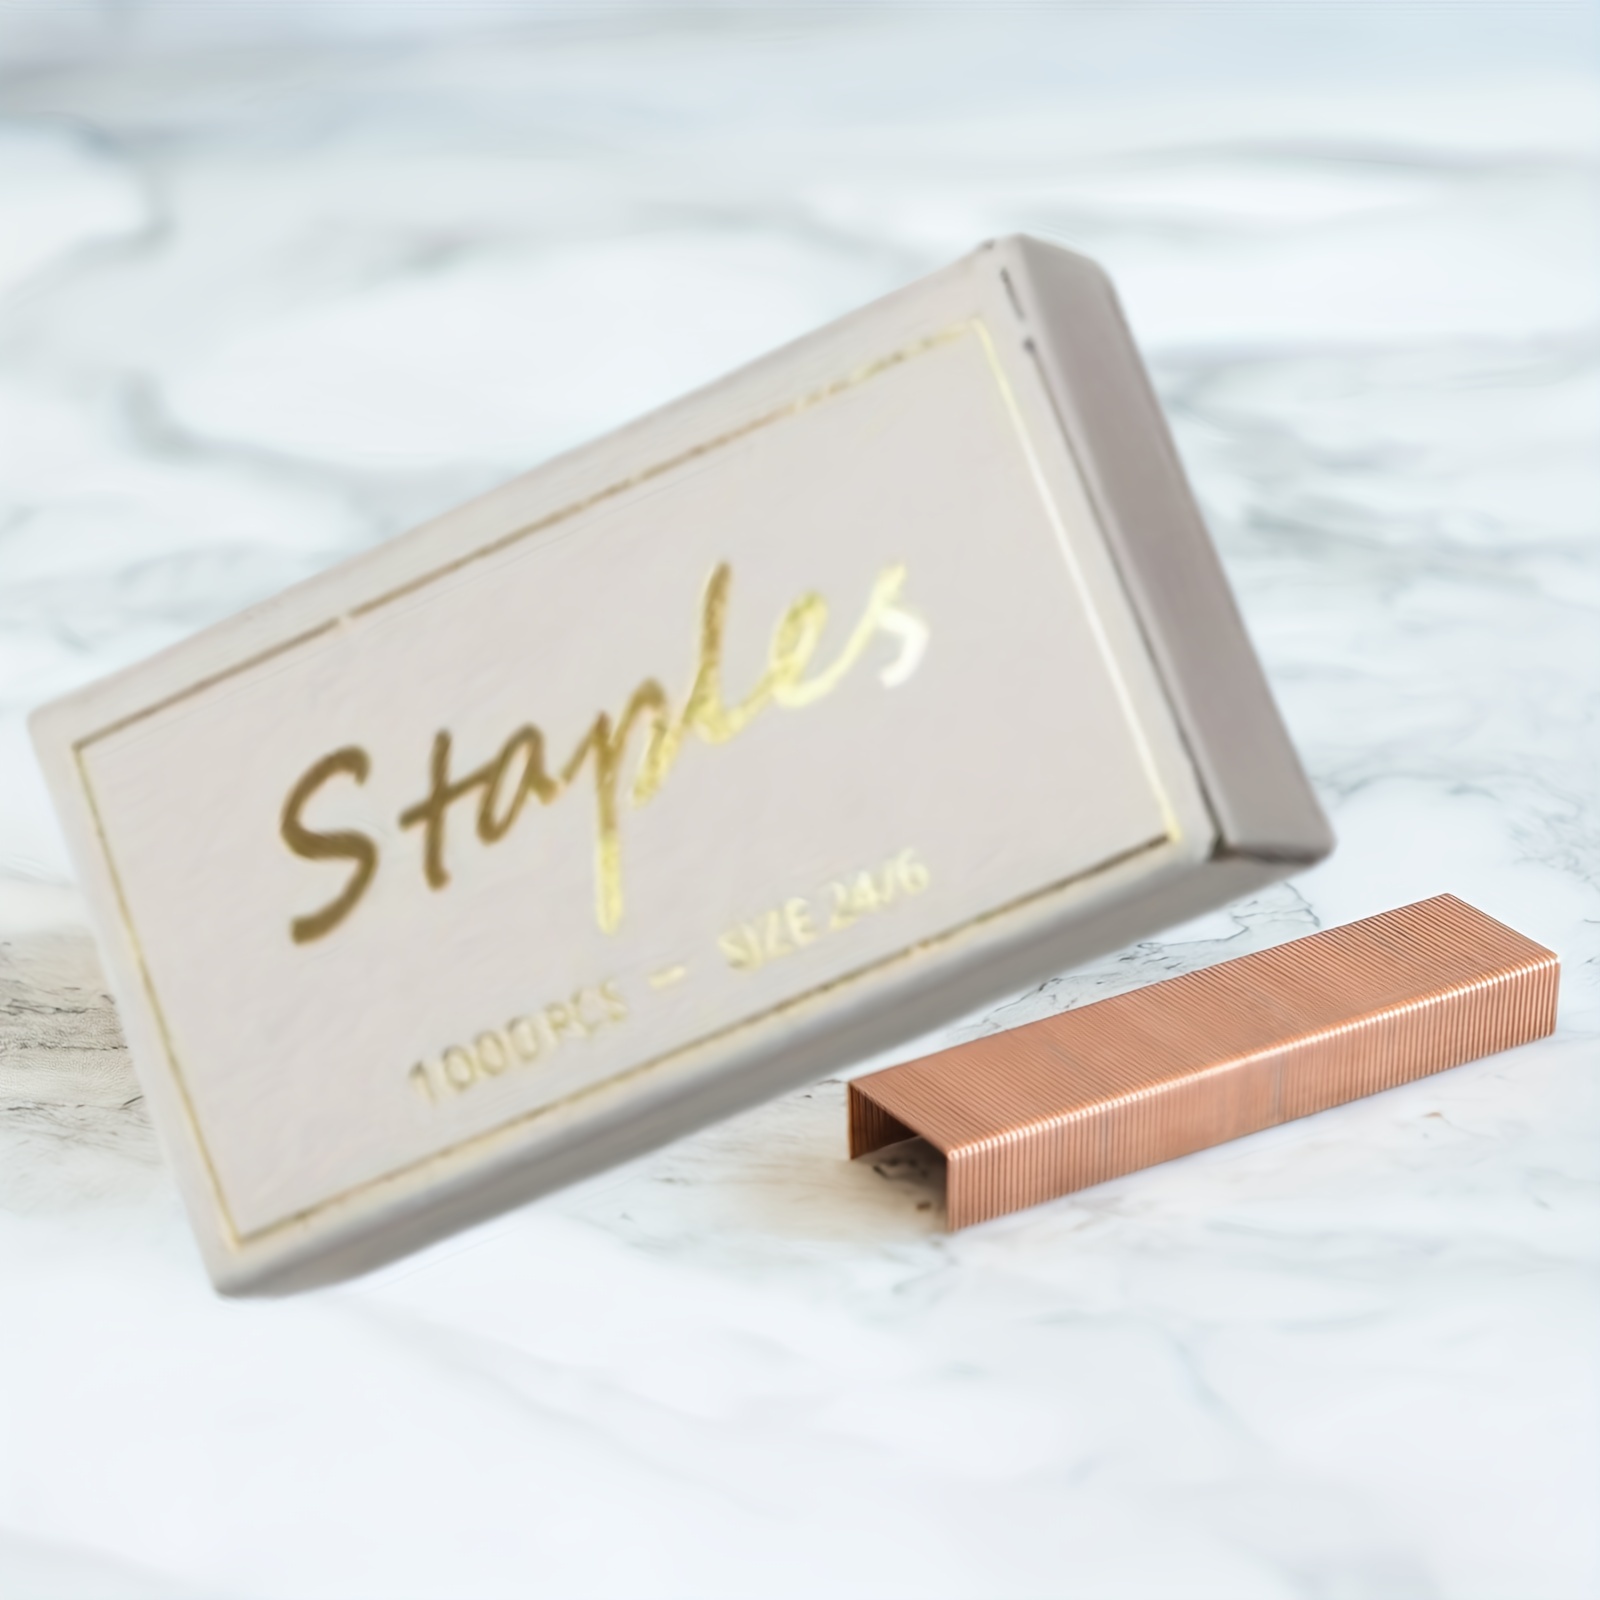 Shop Rose Gold Staples at best price